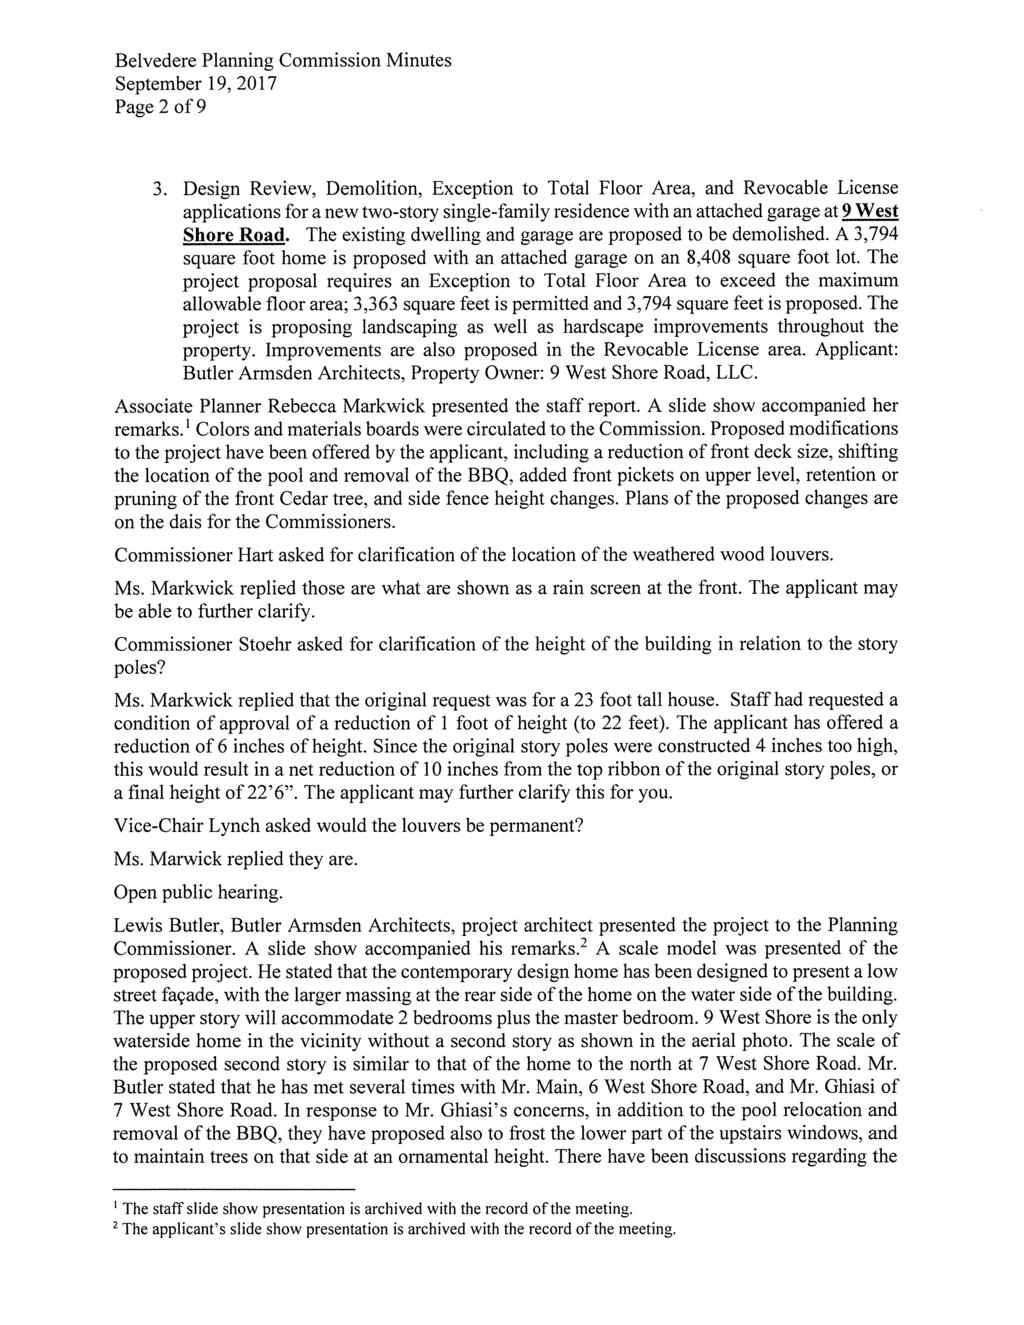 Belvedere Planning Commission Minutes Page 2 of9 3.